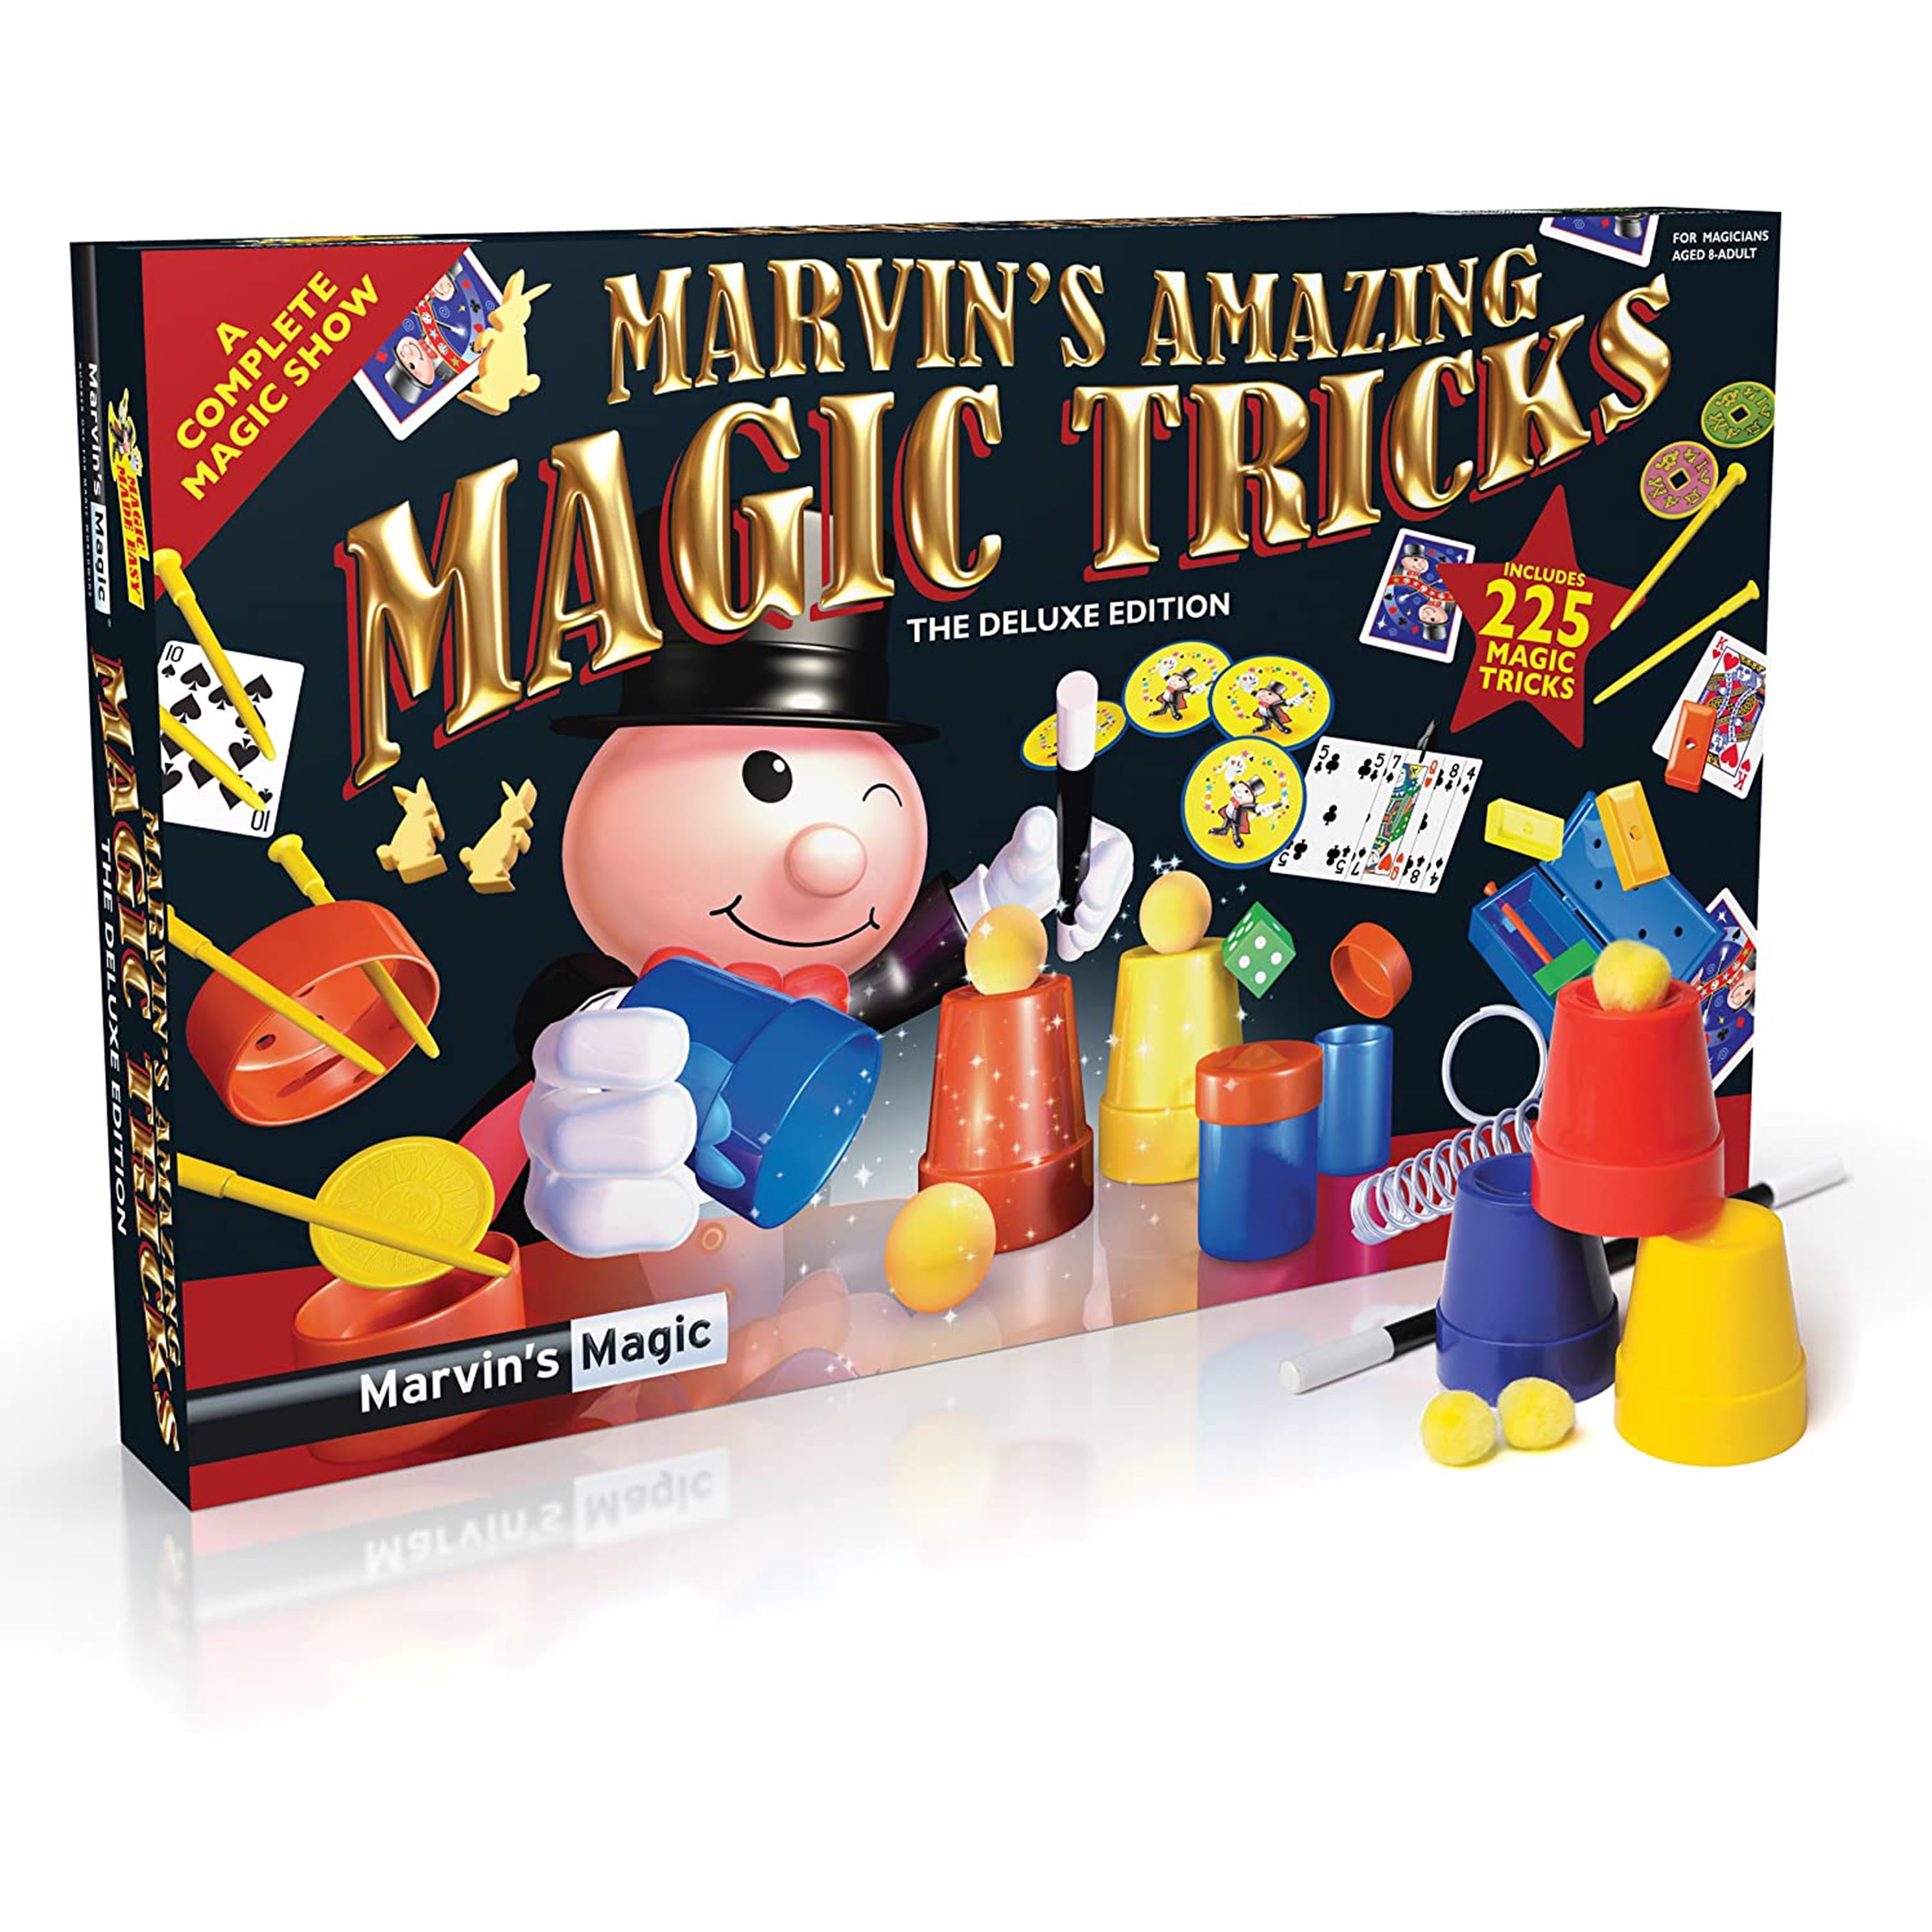 Marvin's Magic - Lights from Everywhere - Teen & Adult Edition -  Professional Adult Tricks Set - Amazing Magic Tricks for Teens & Adults -  Includes